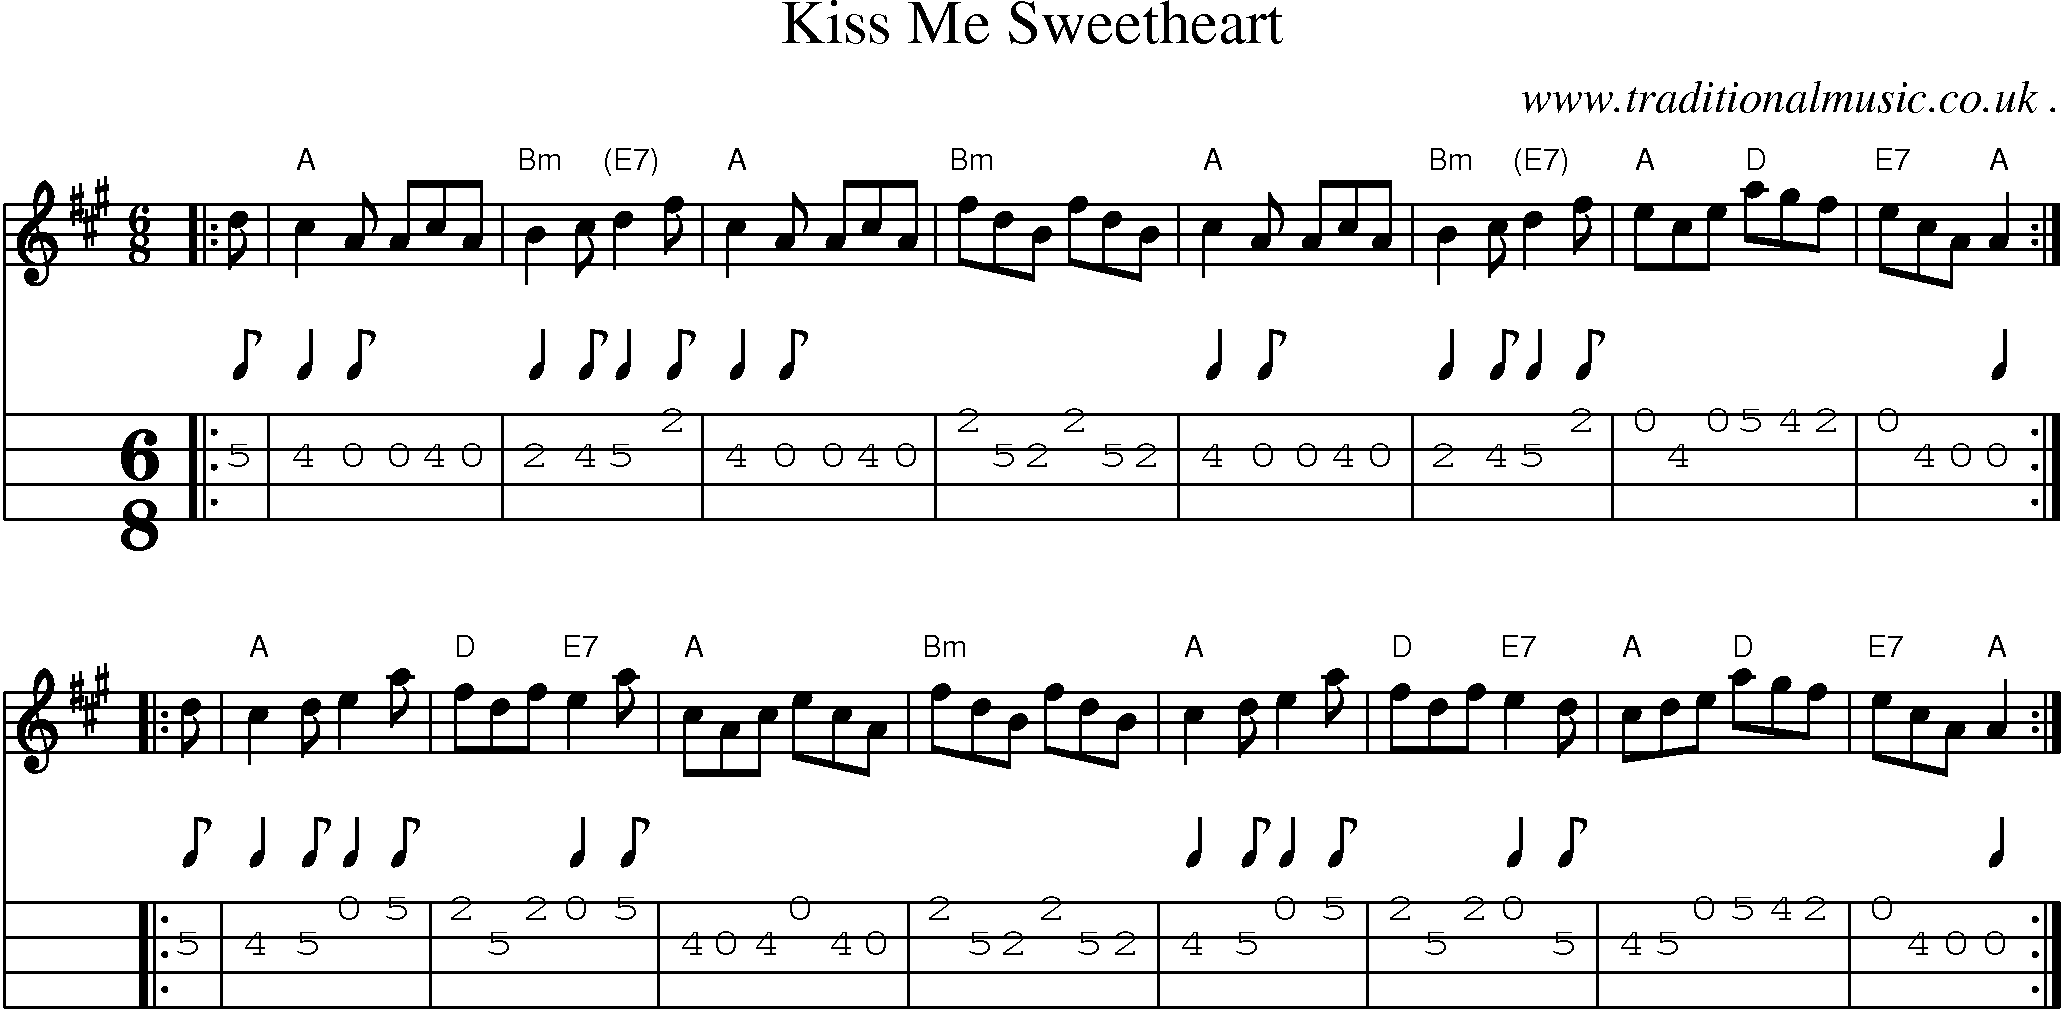 Sheet-music  score, Chords and Mandolin Tabs for Kiss Me Sweetheart